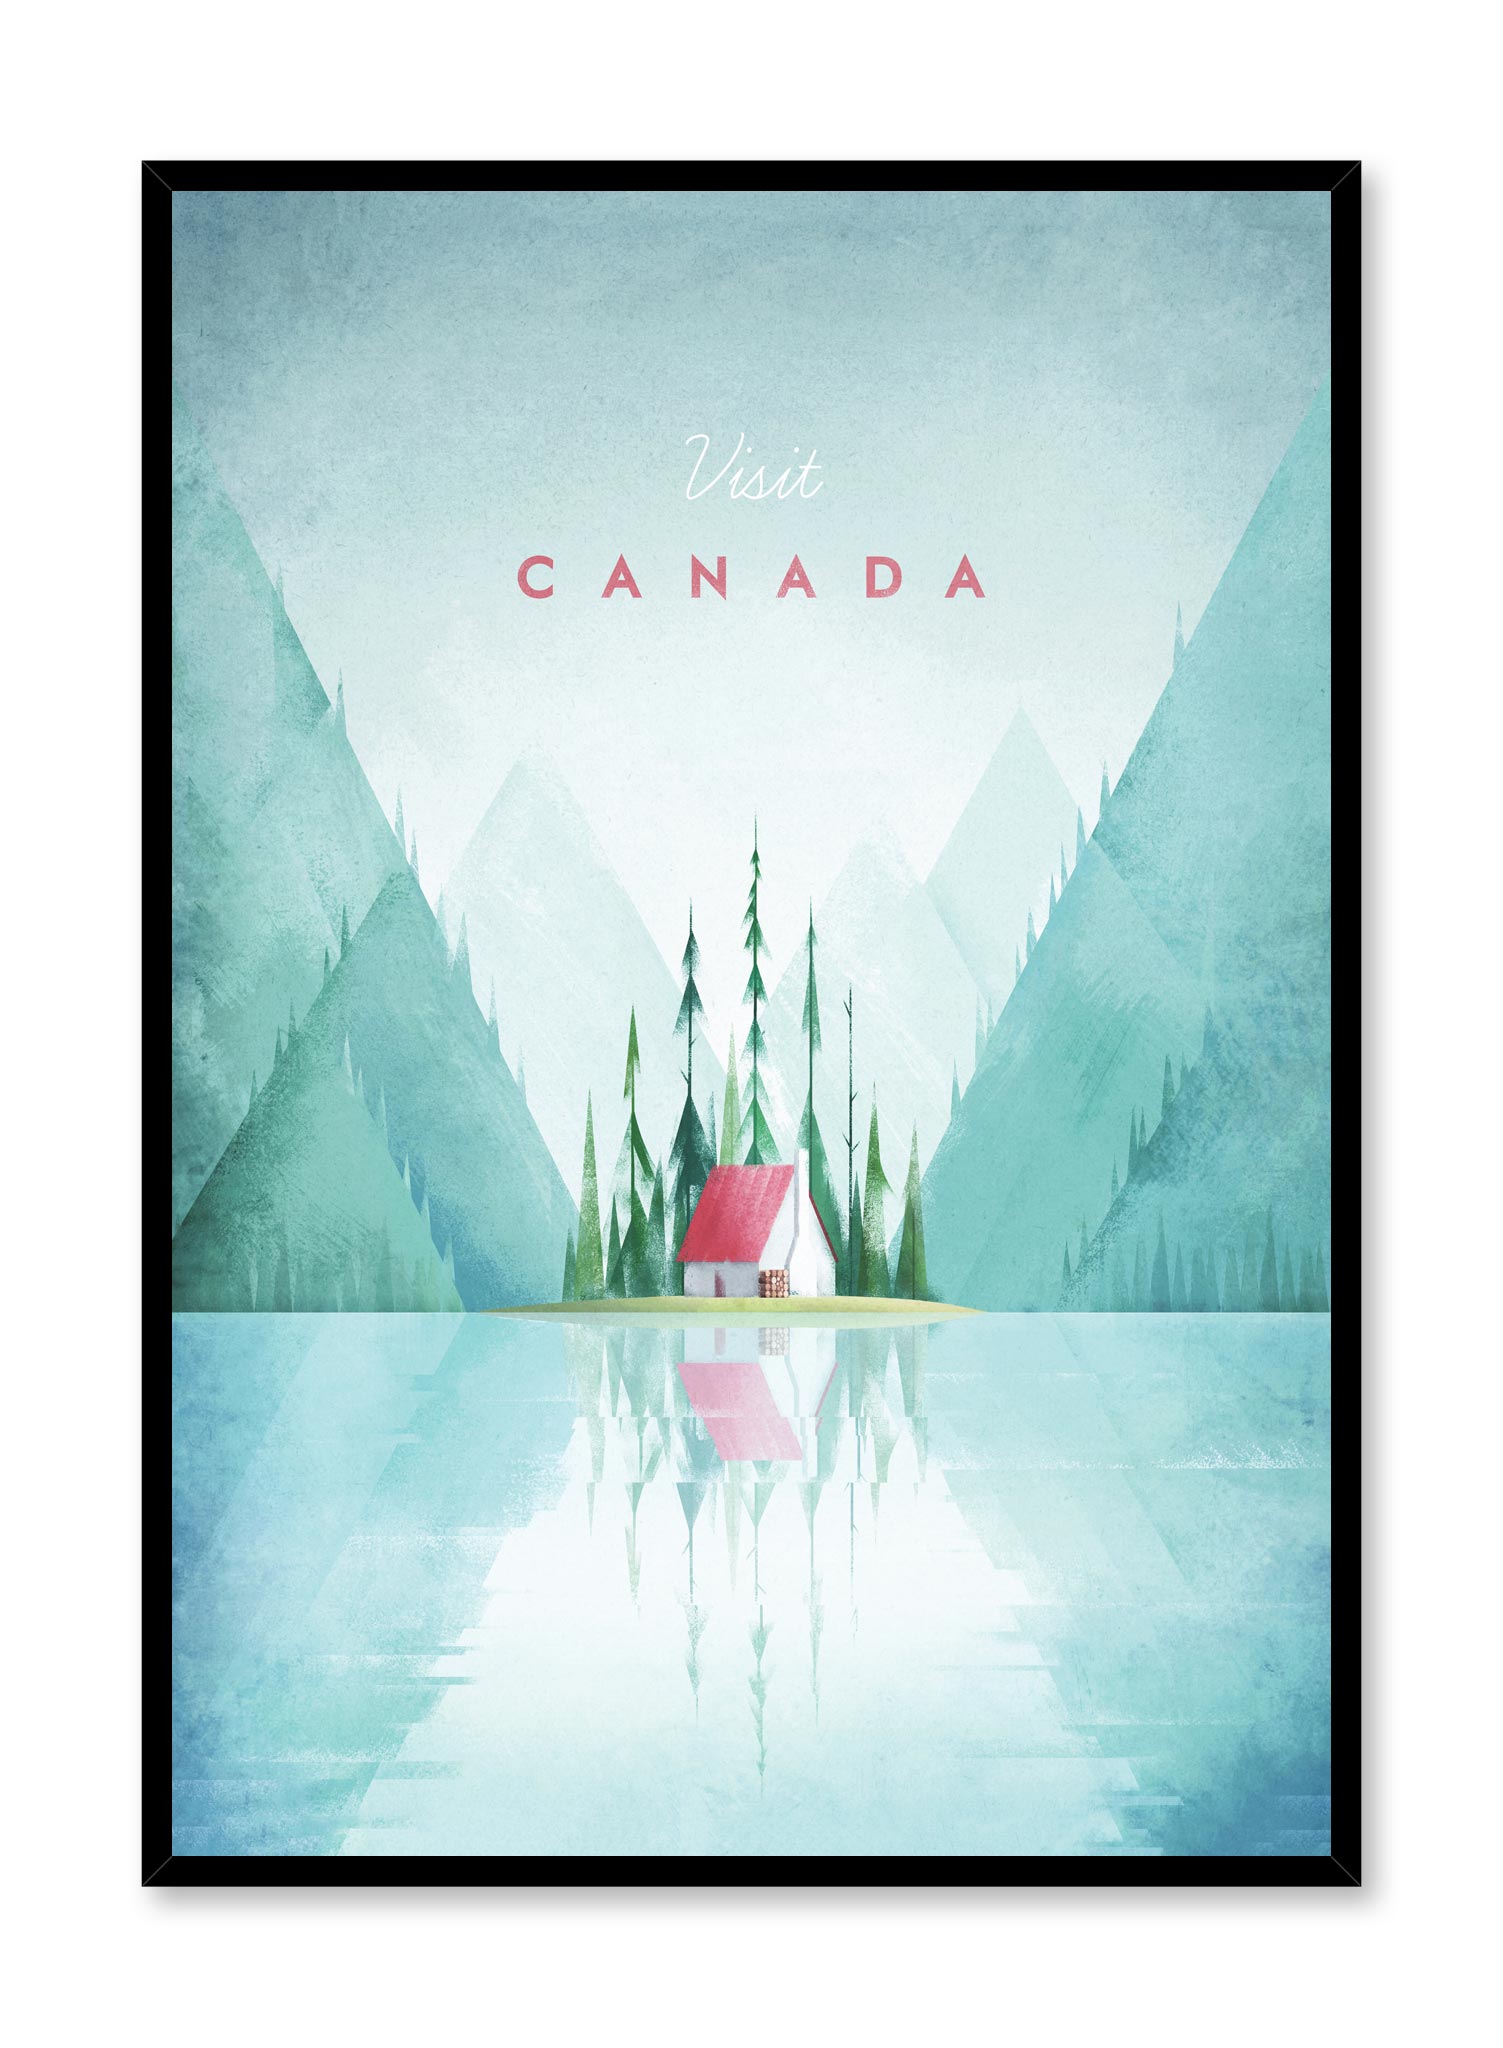 Modern minimalist travel poster by Opposite Wall with illustration of Canada